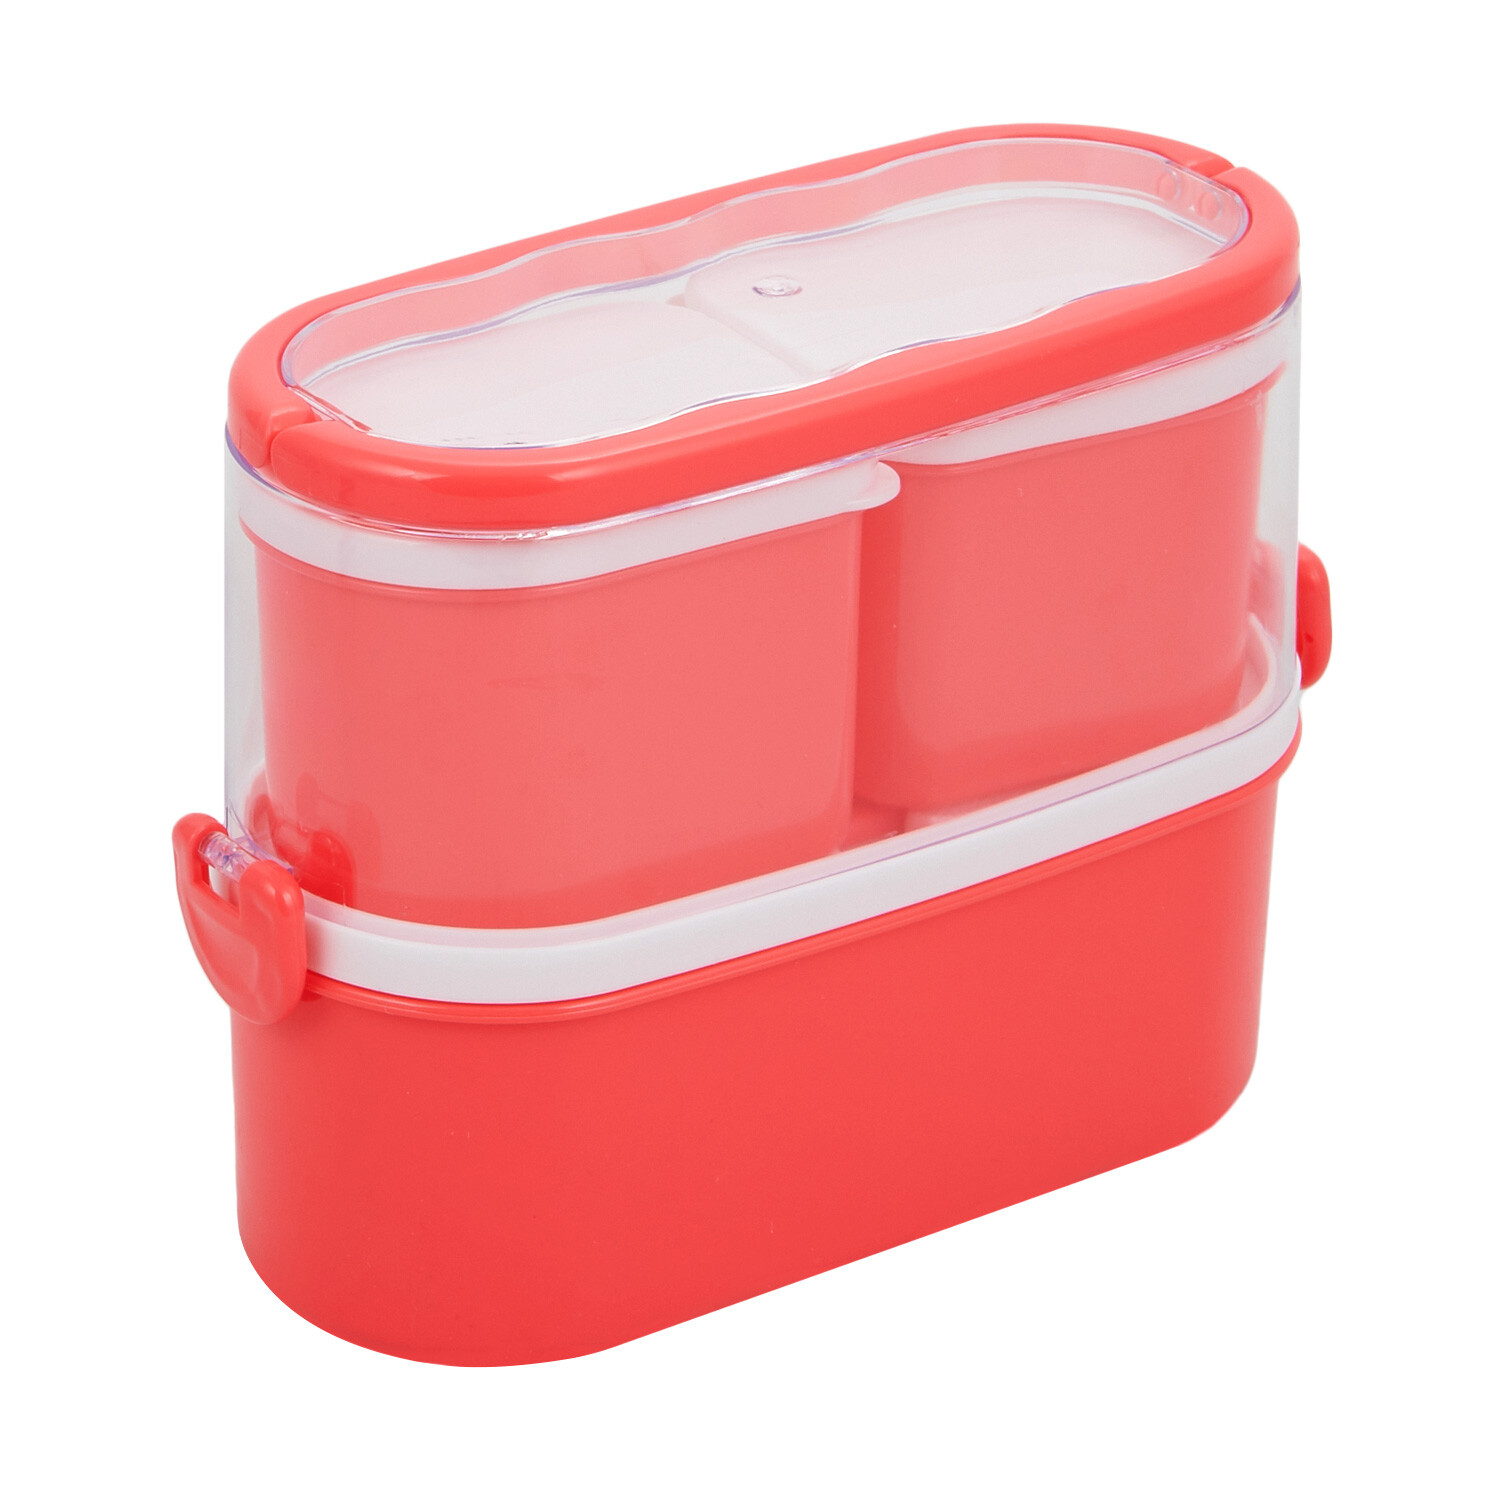 Triple Compartment Lunch Box - Red Image 3